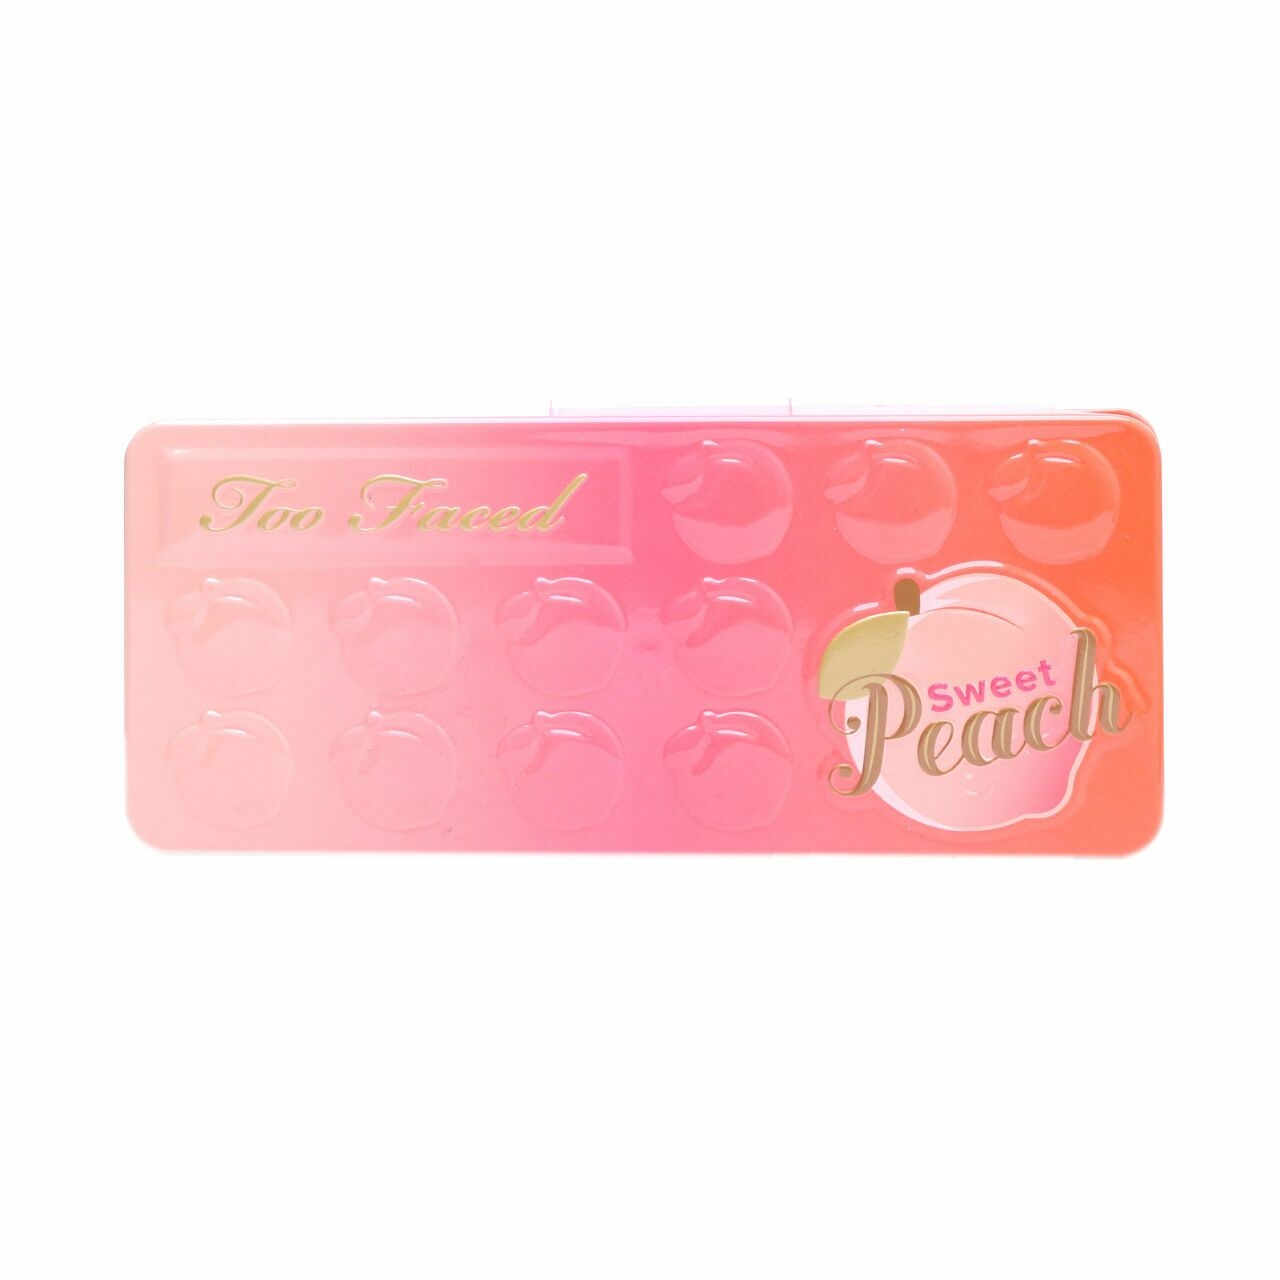 Too Faced Sweet Peach Sets and Palette